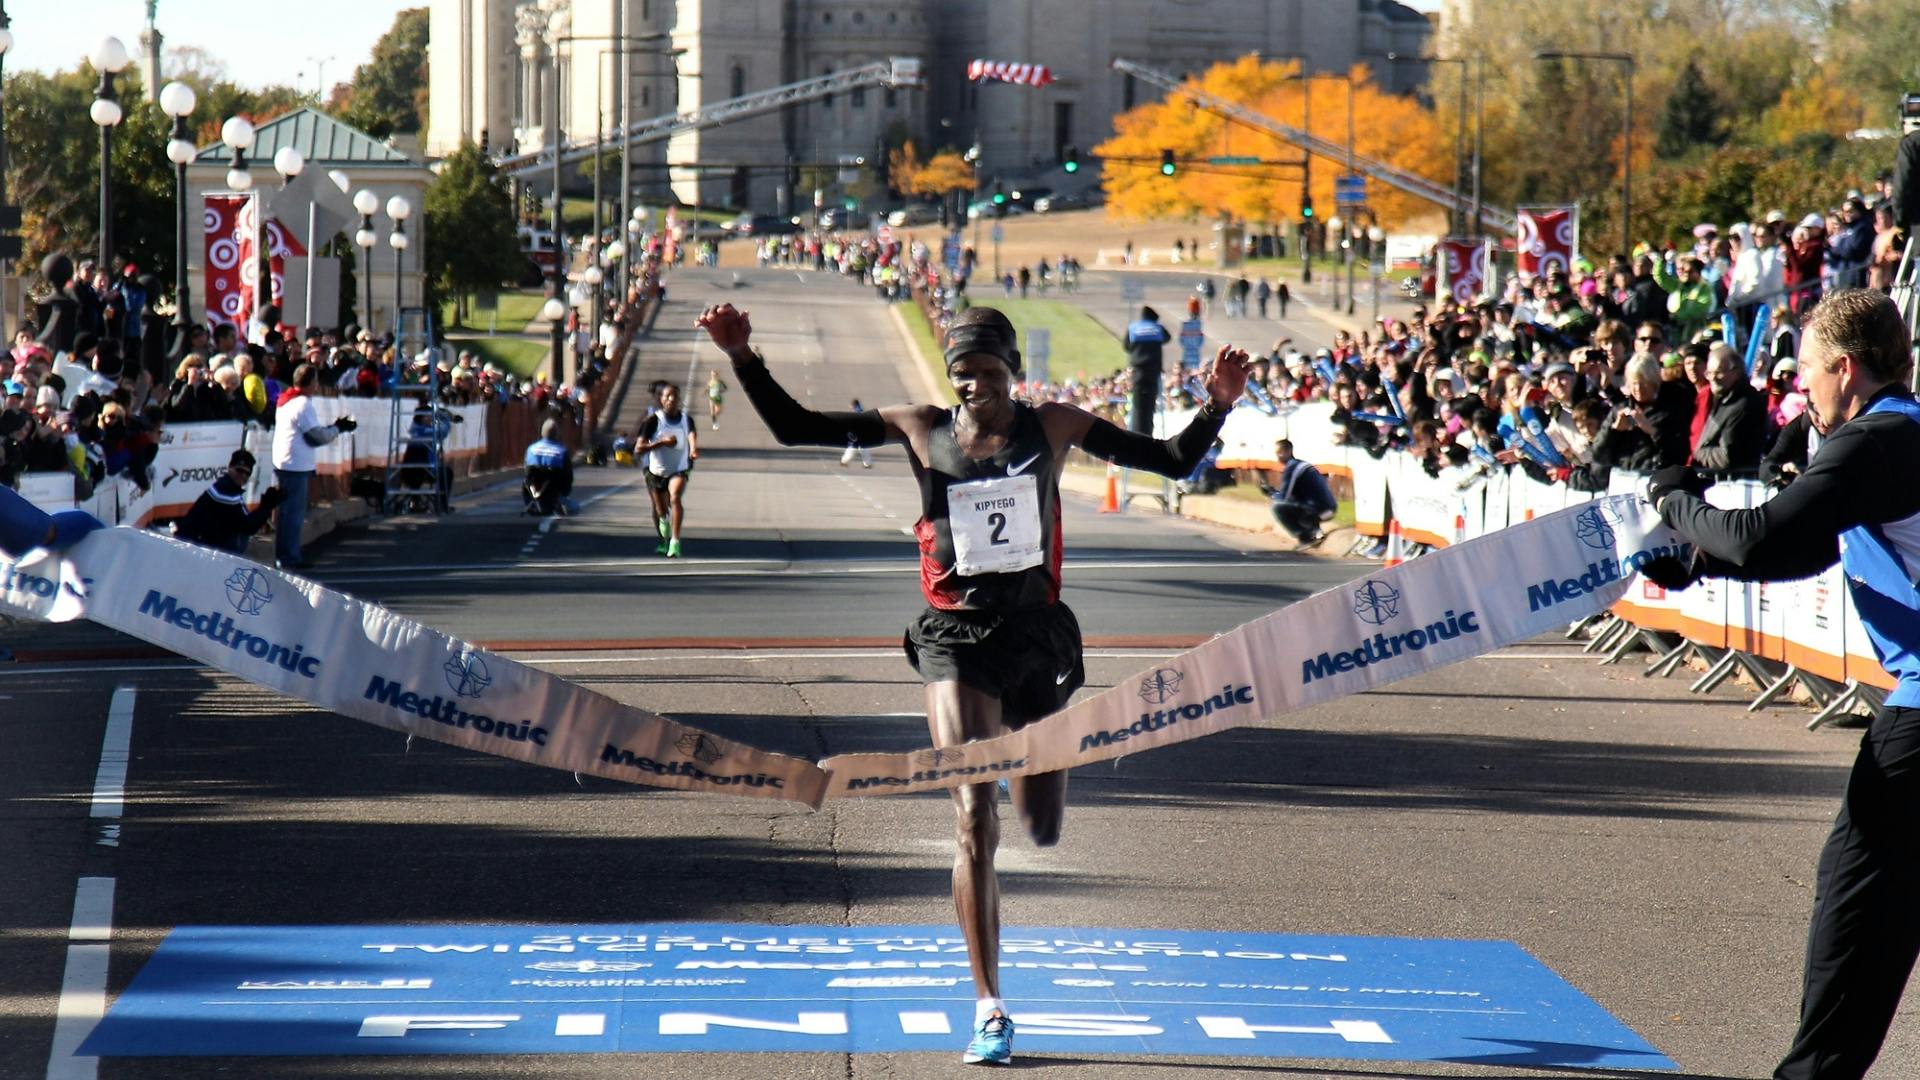 The 2012 Twin Cities Marathon started at 8 a.m. with a sub-30-degree temperature.